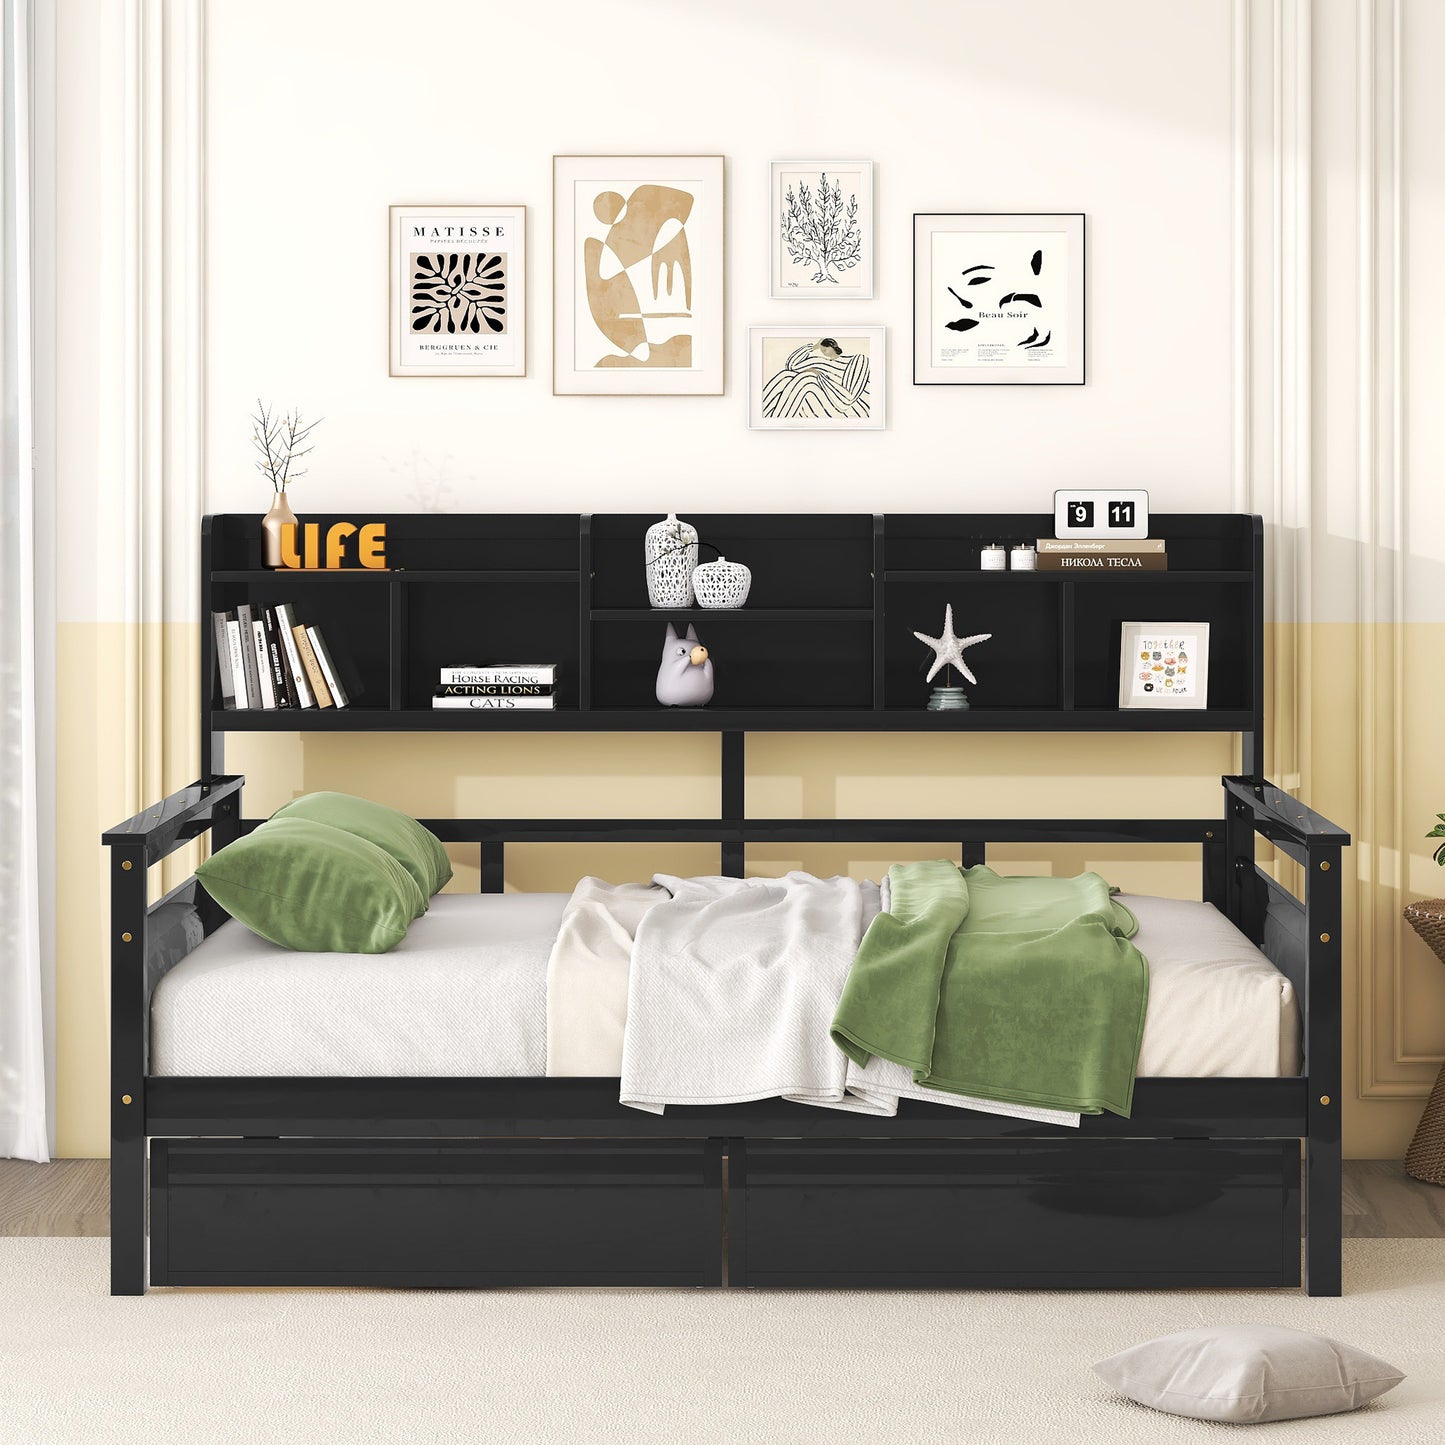 Full size Daybed, Wood Slat Support, with Bedside Shelf and Two Drawers, Espresso